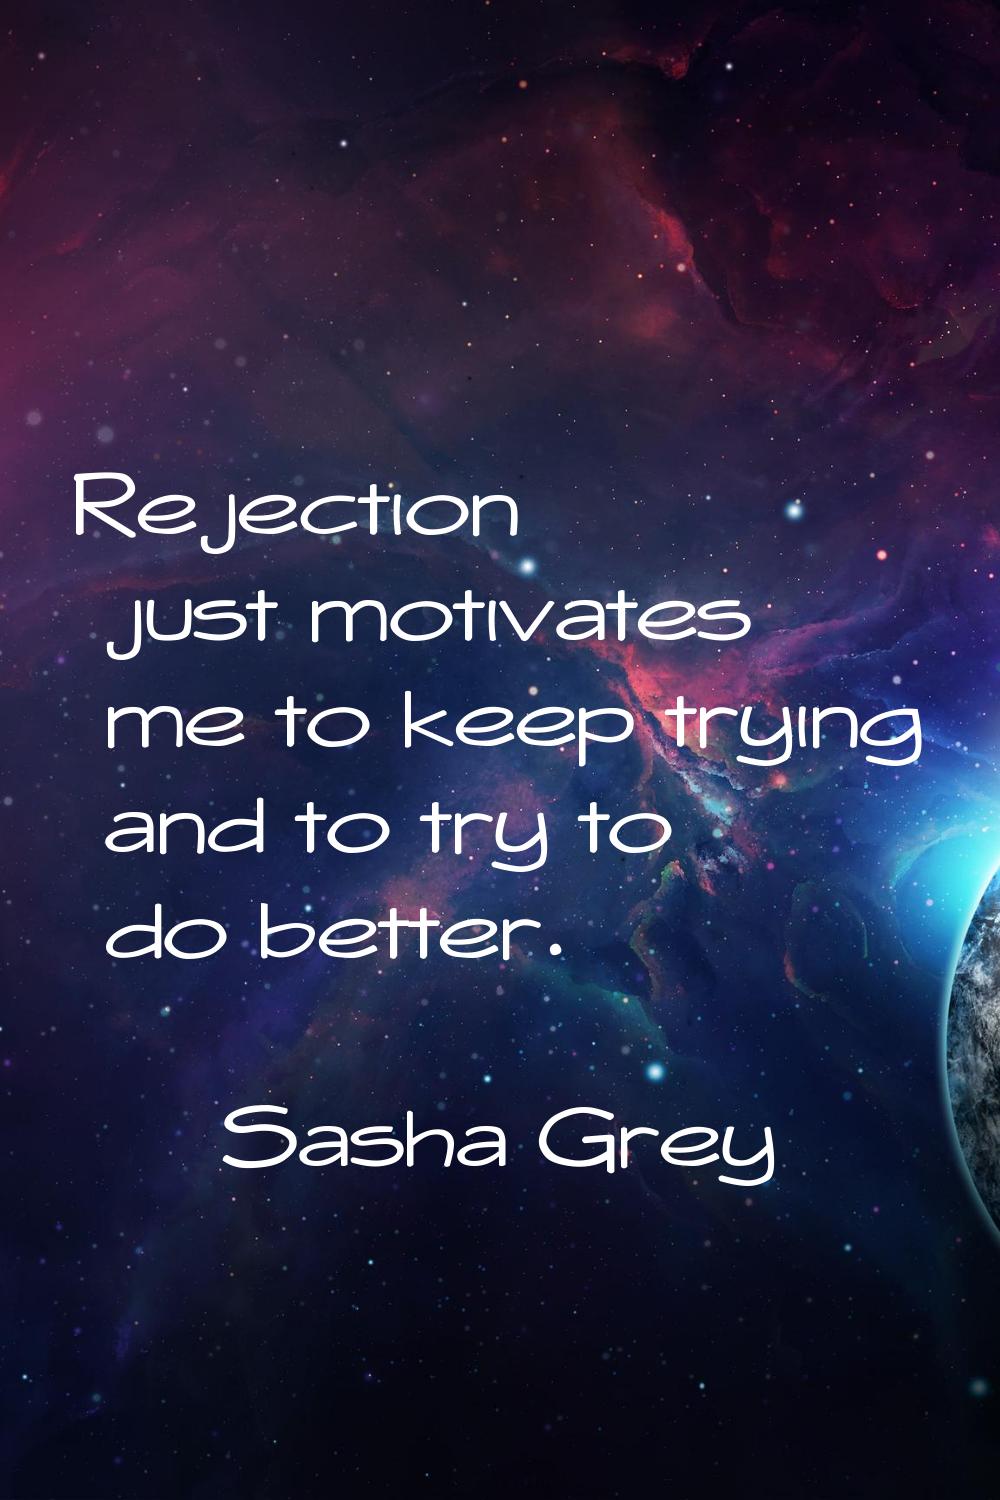 Rejection just motivates me to keep trying and to try to do better.